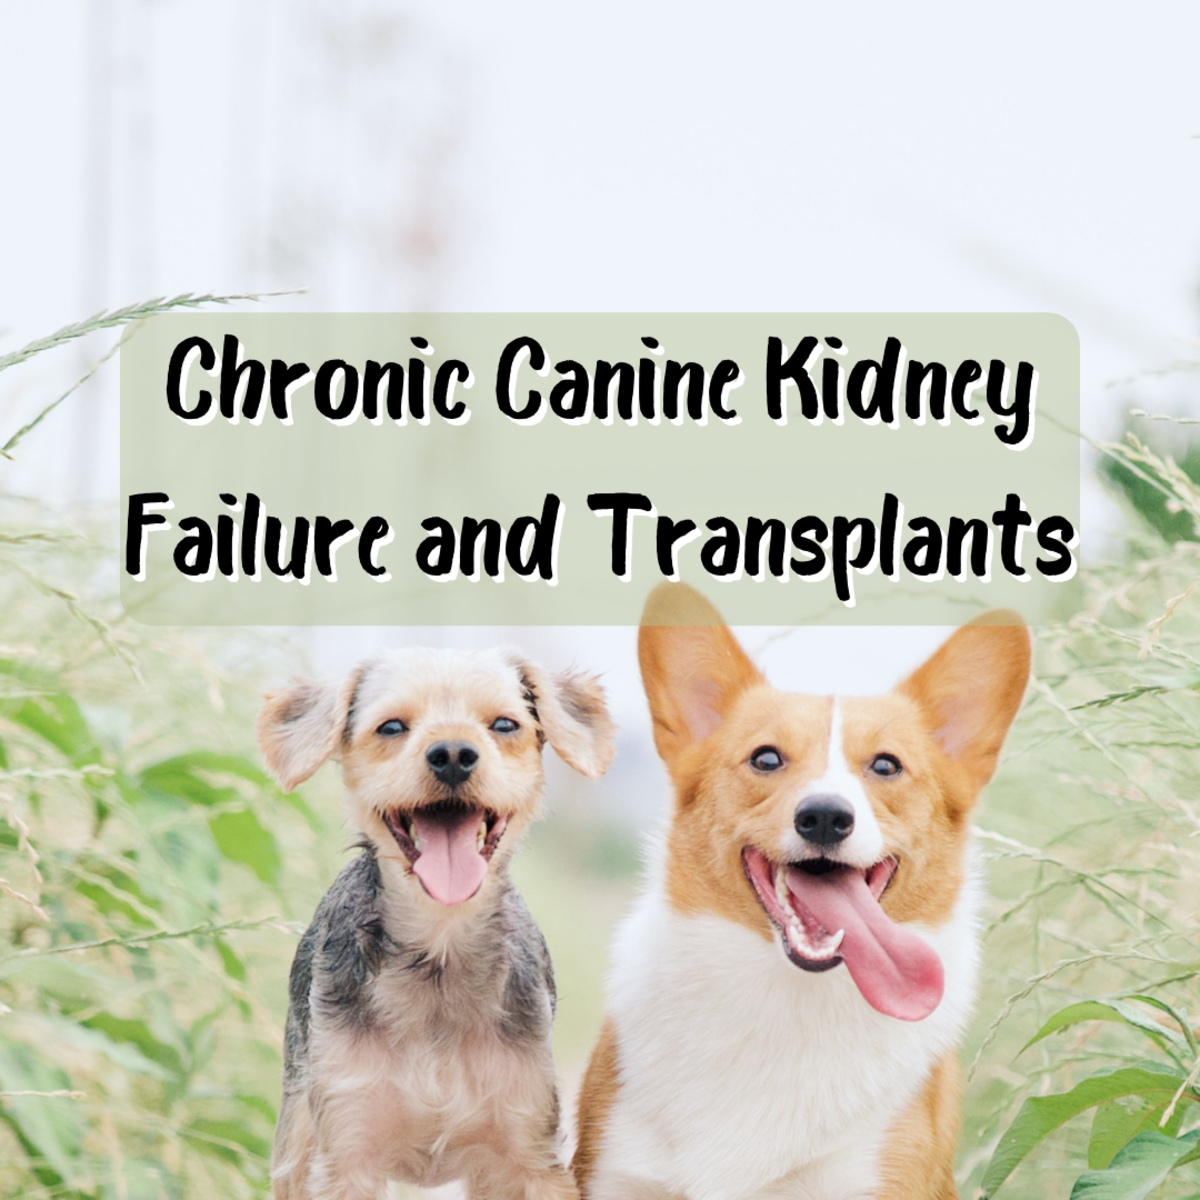 Chronic Kidney Failure in Dogs: Facts and Treatment Options